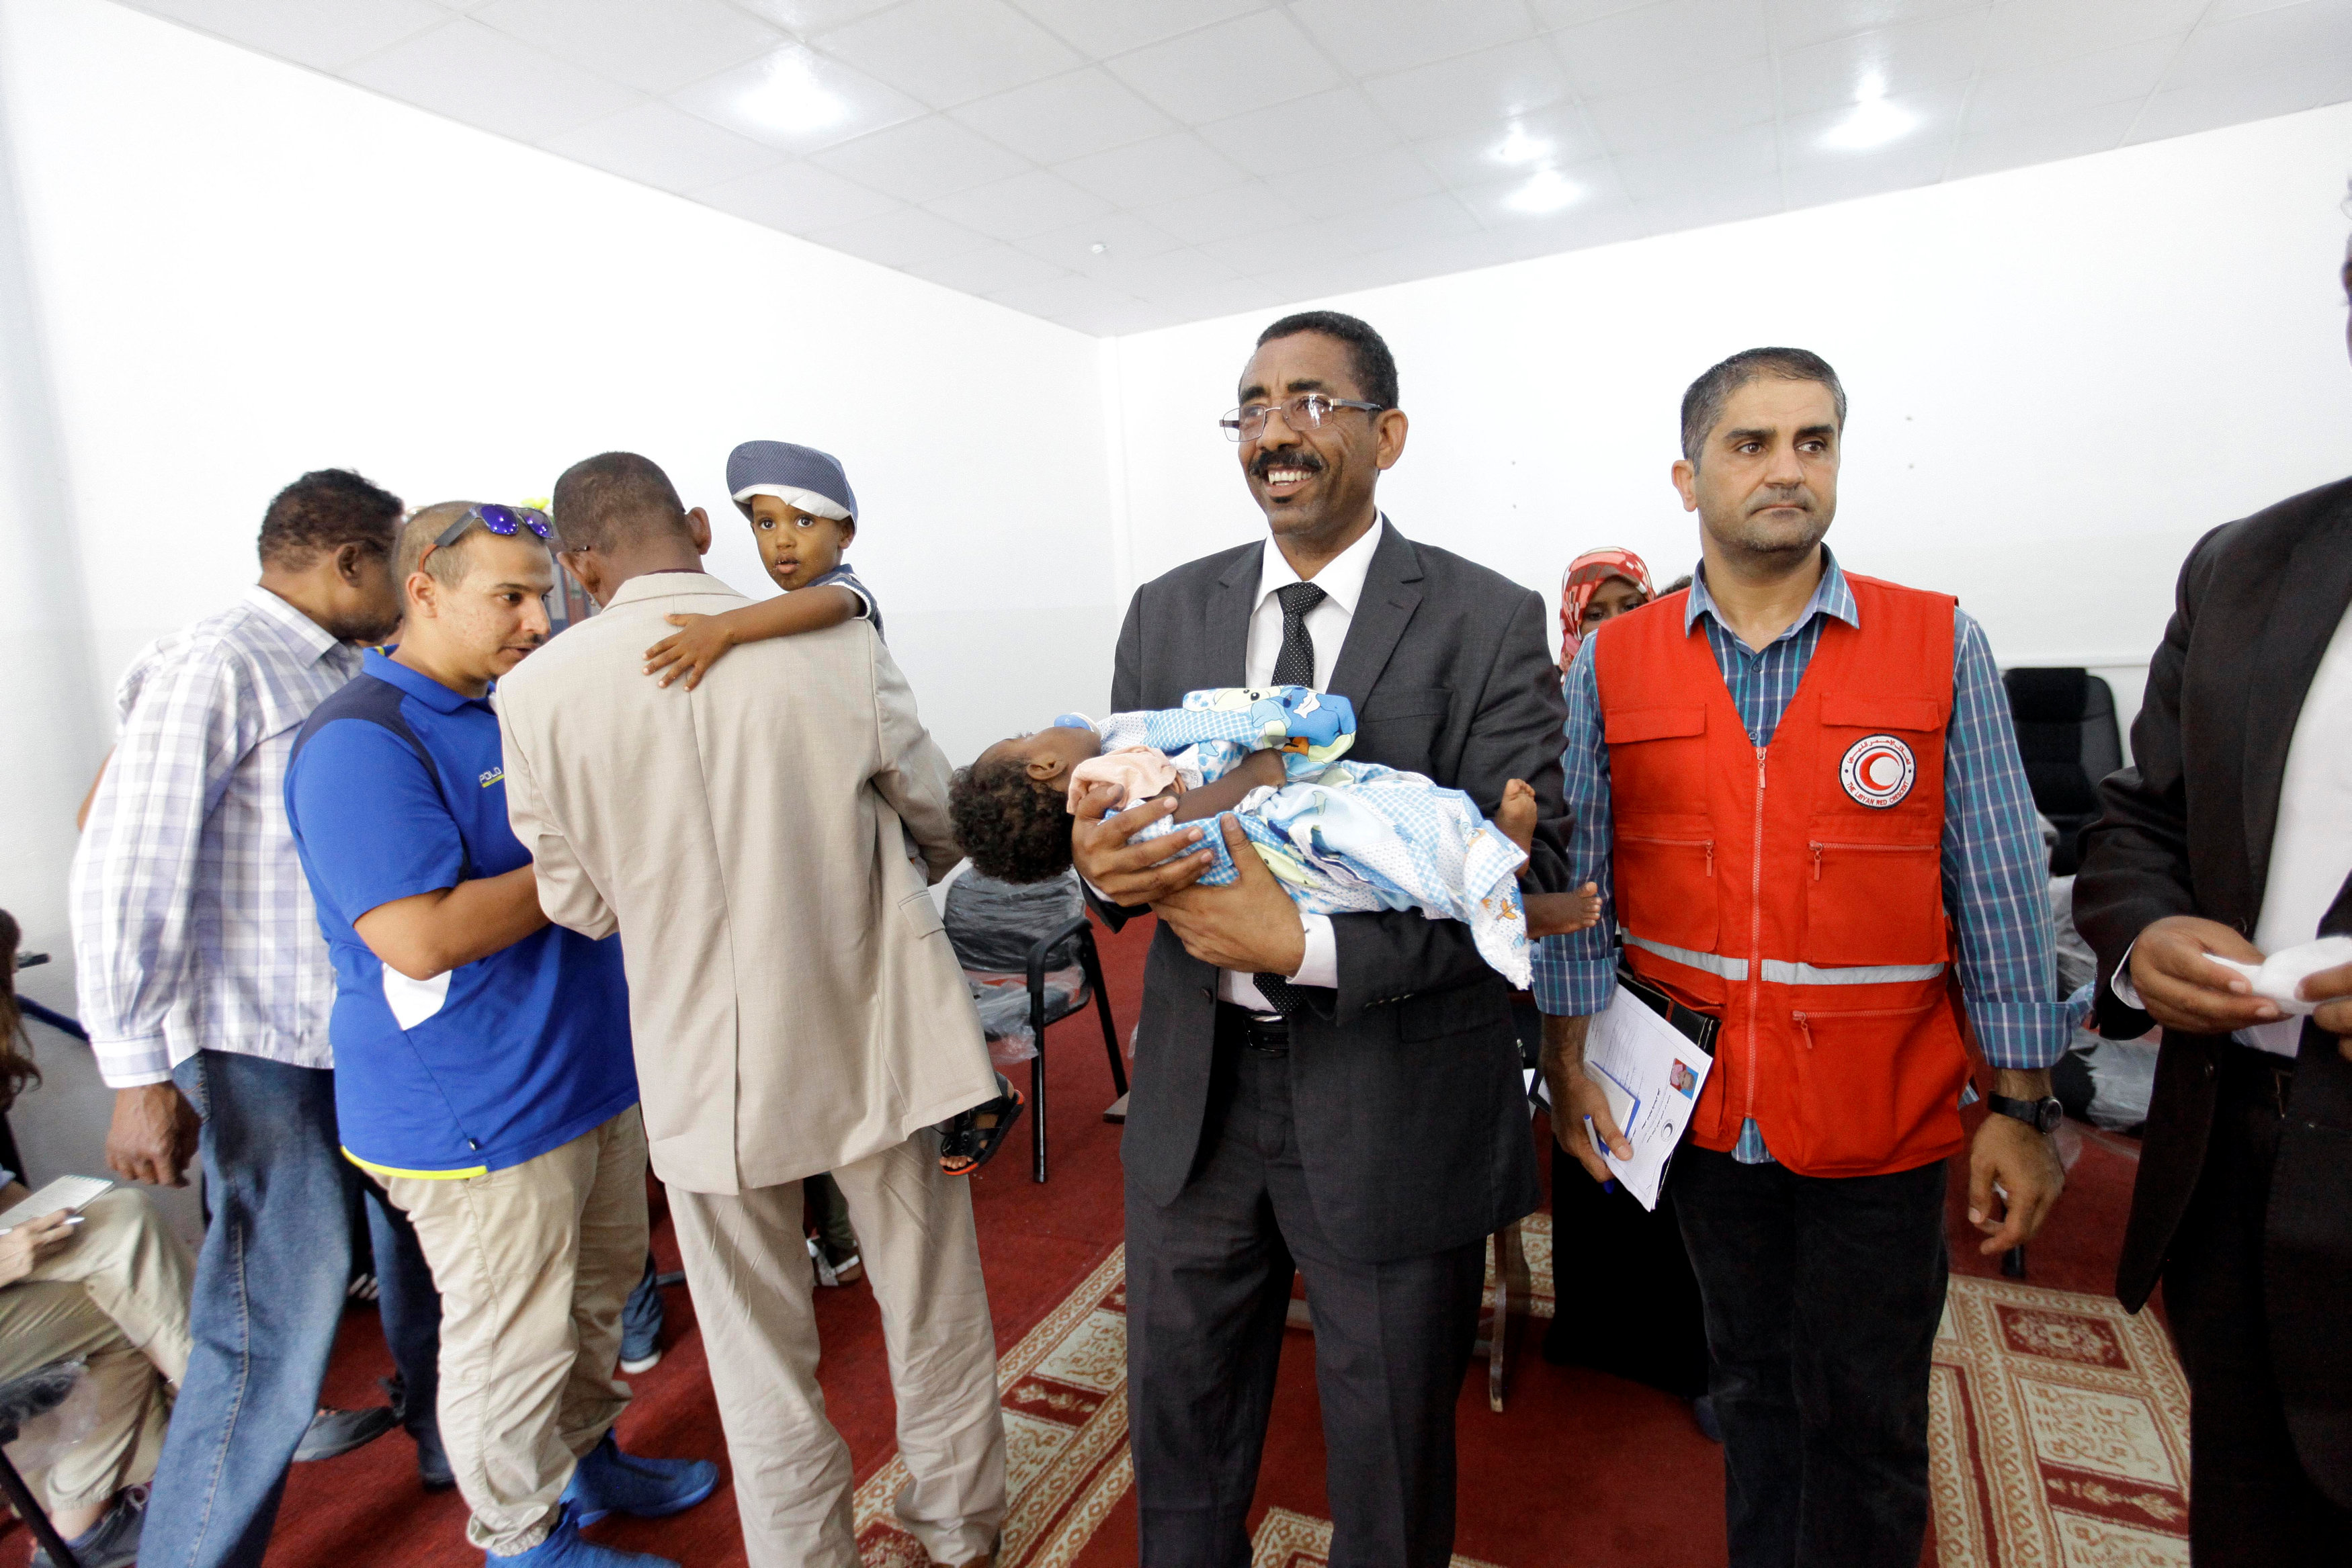 In pictures: IS militants' children handed over to Sudanese consul in Libya